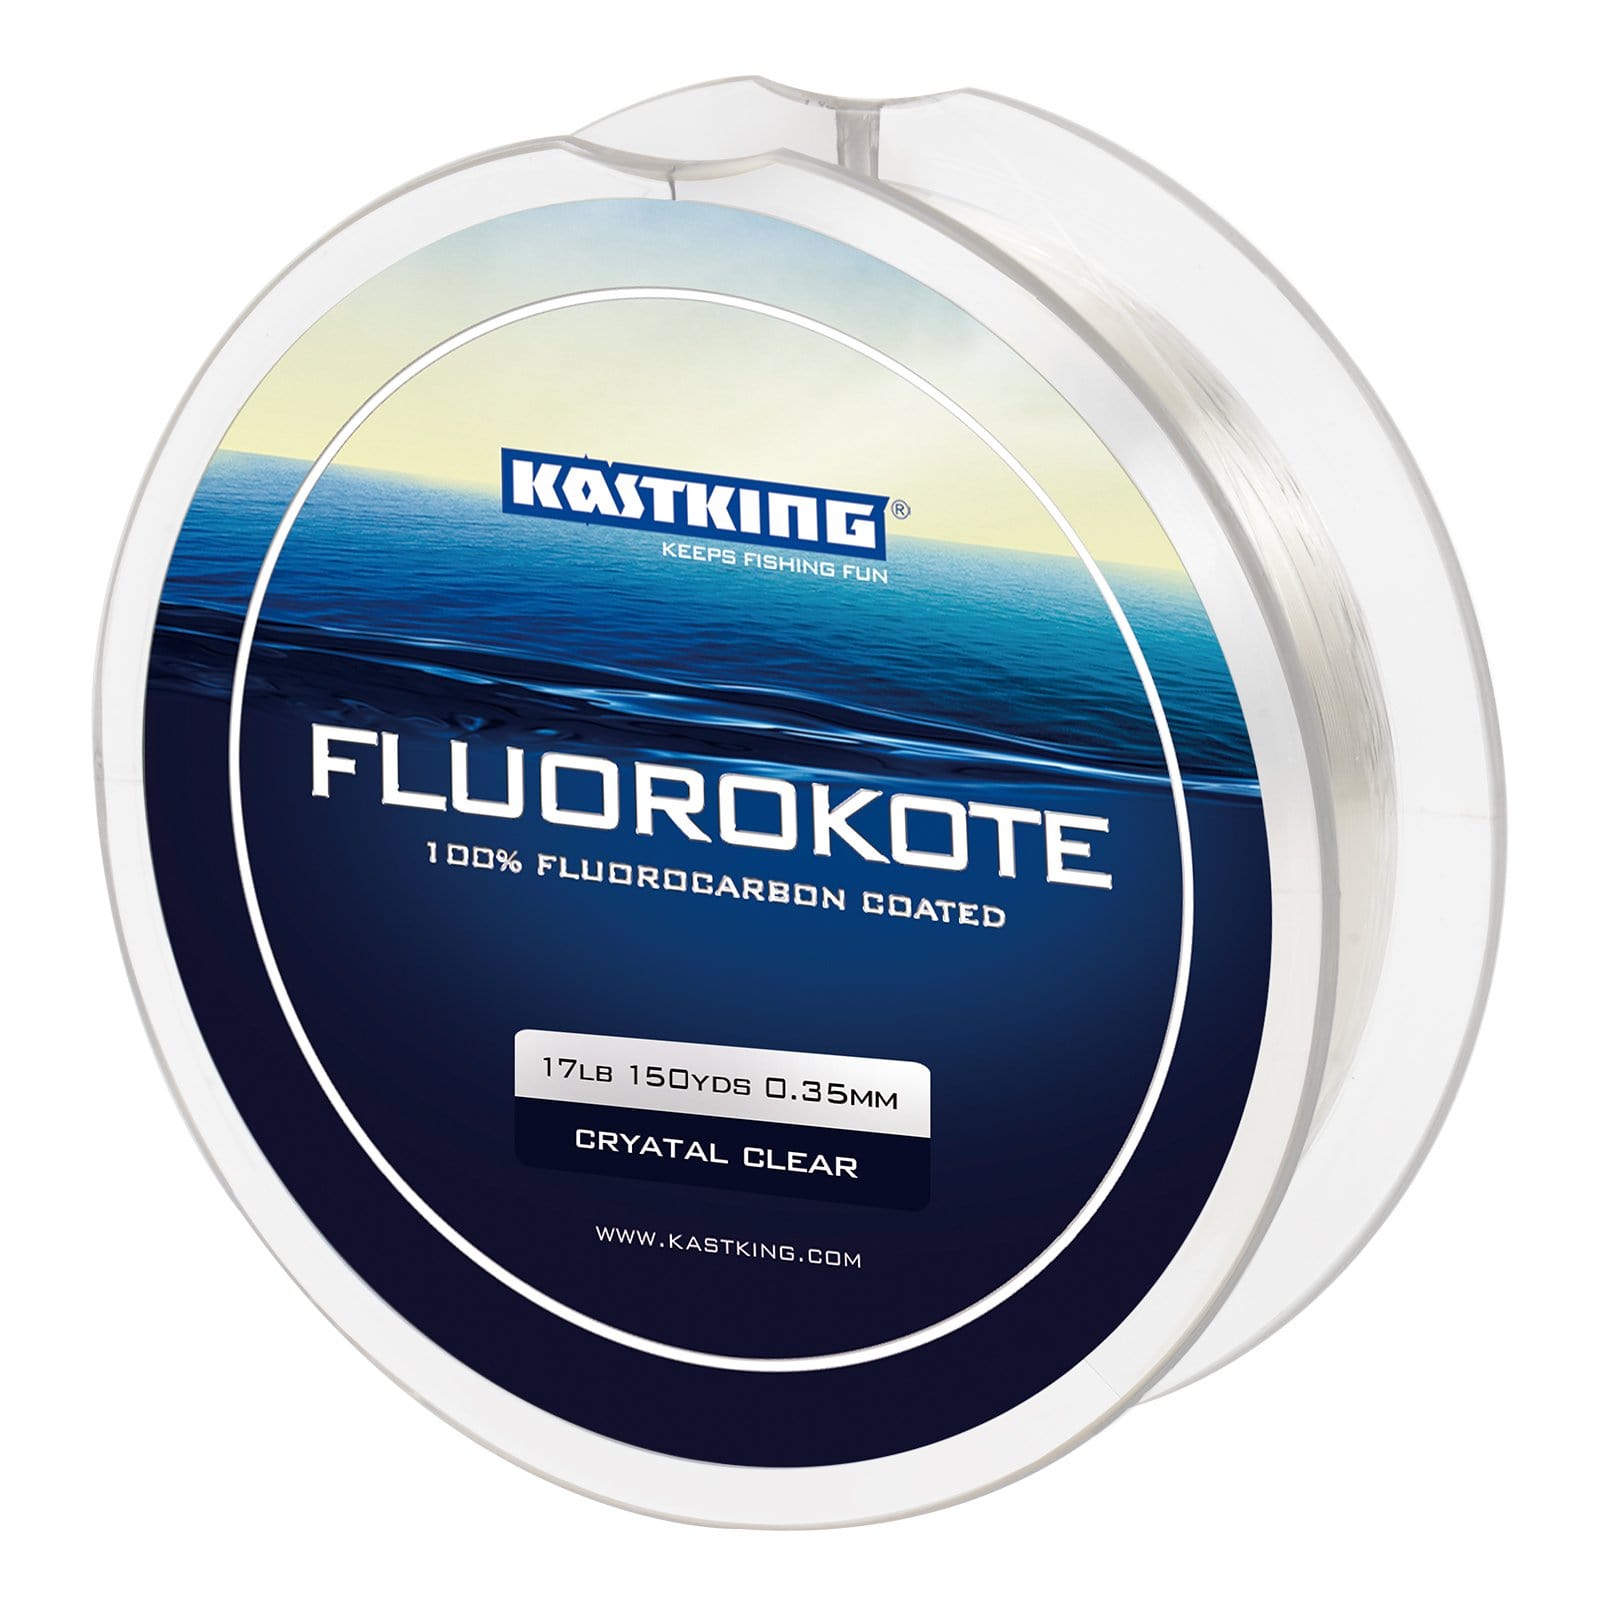 DID YOU KNOW THIS ABOUT NEW KastKing Fluorocarbon Fishing Line